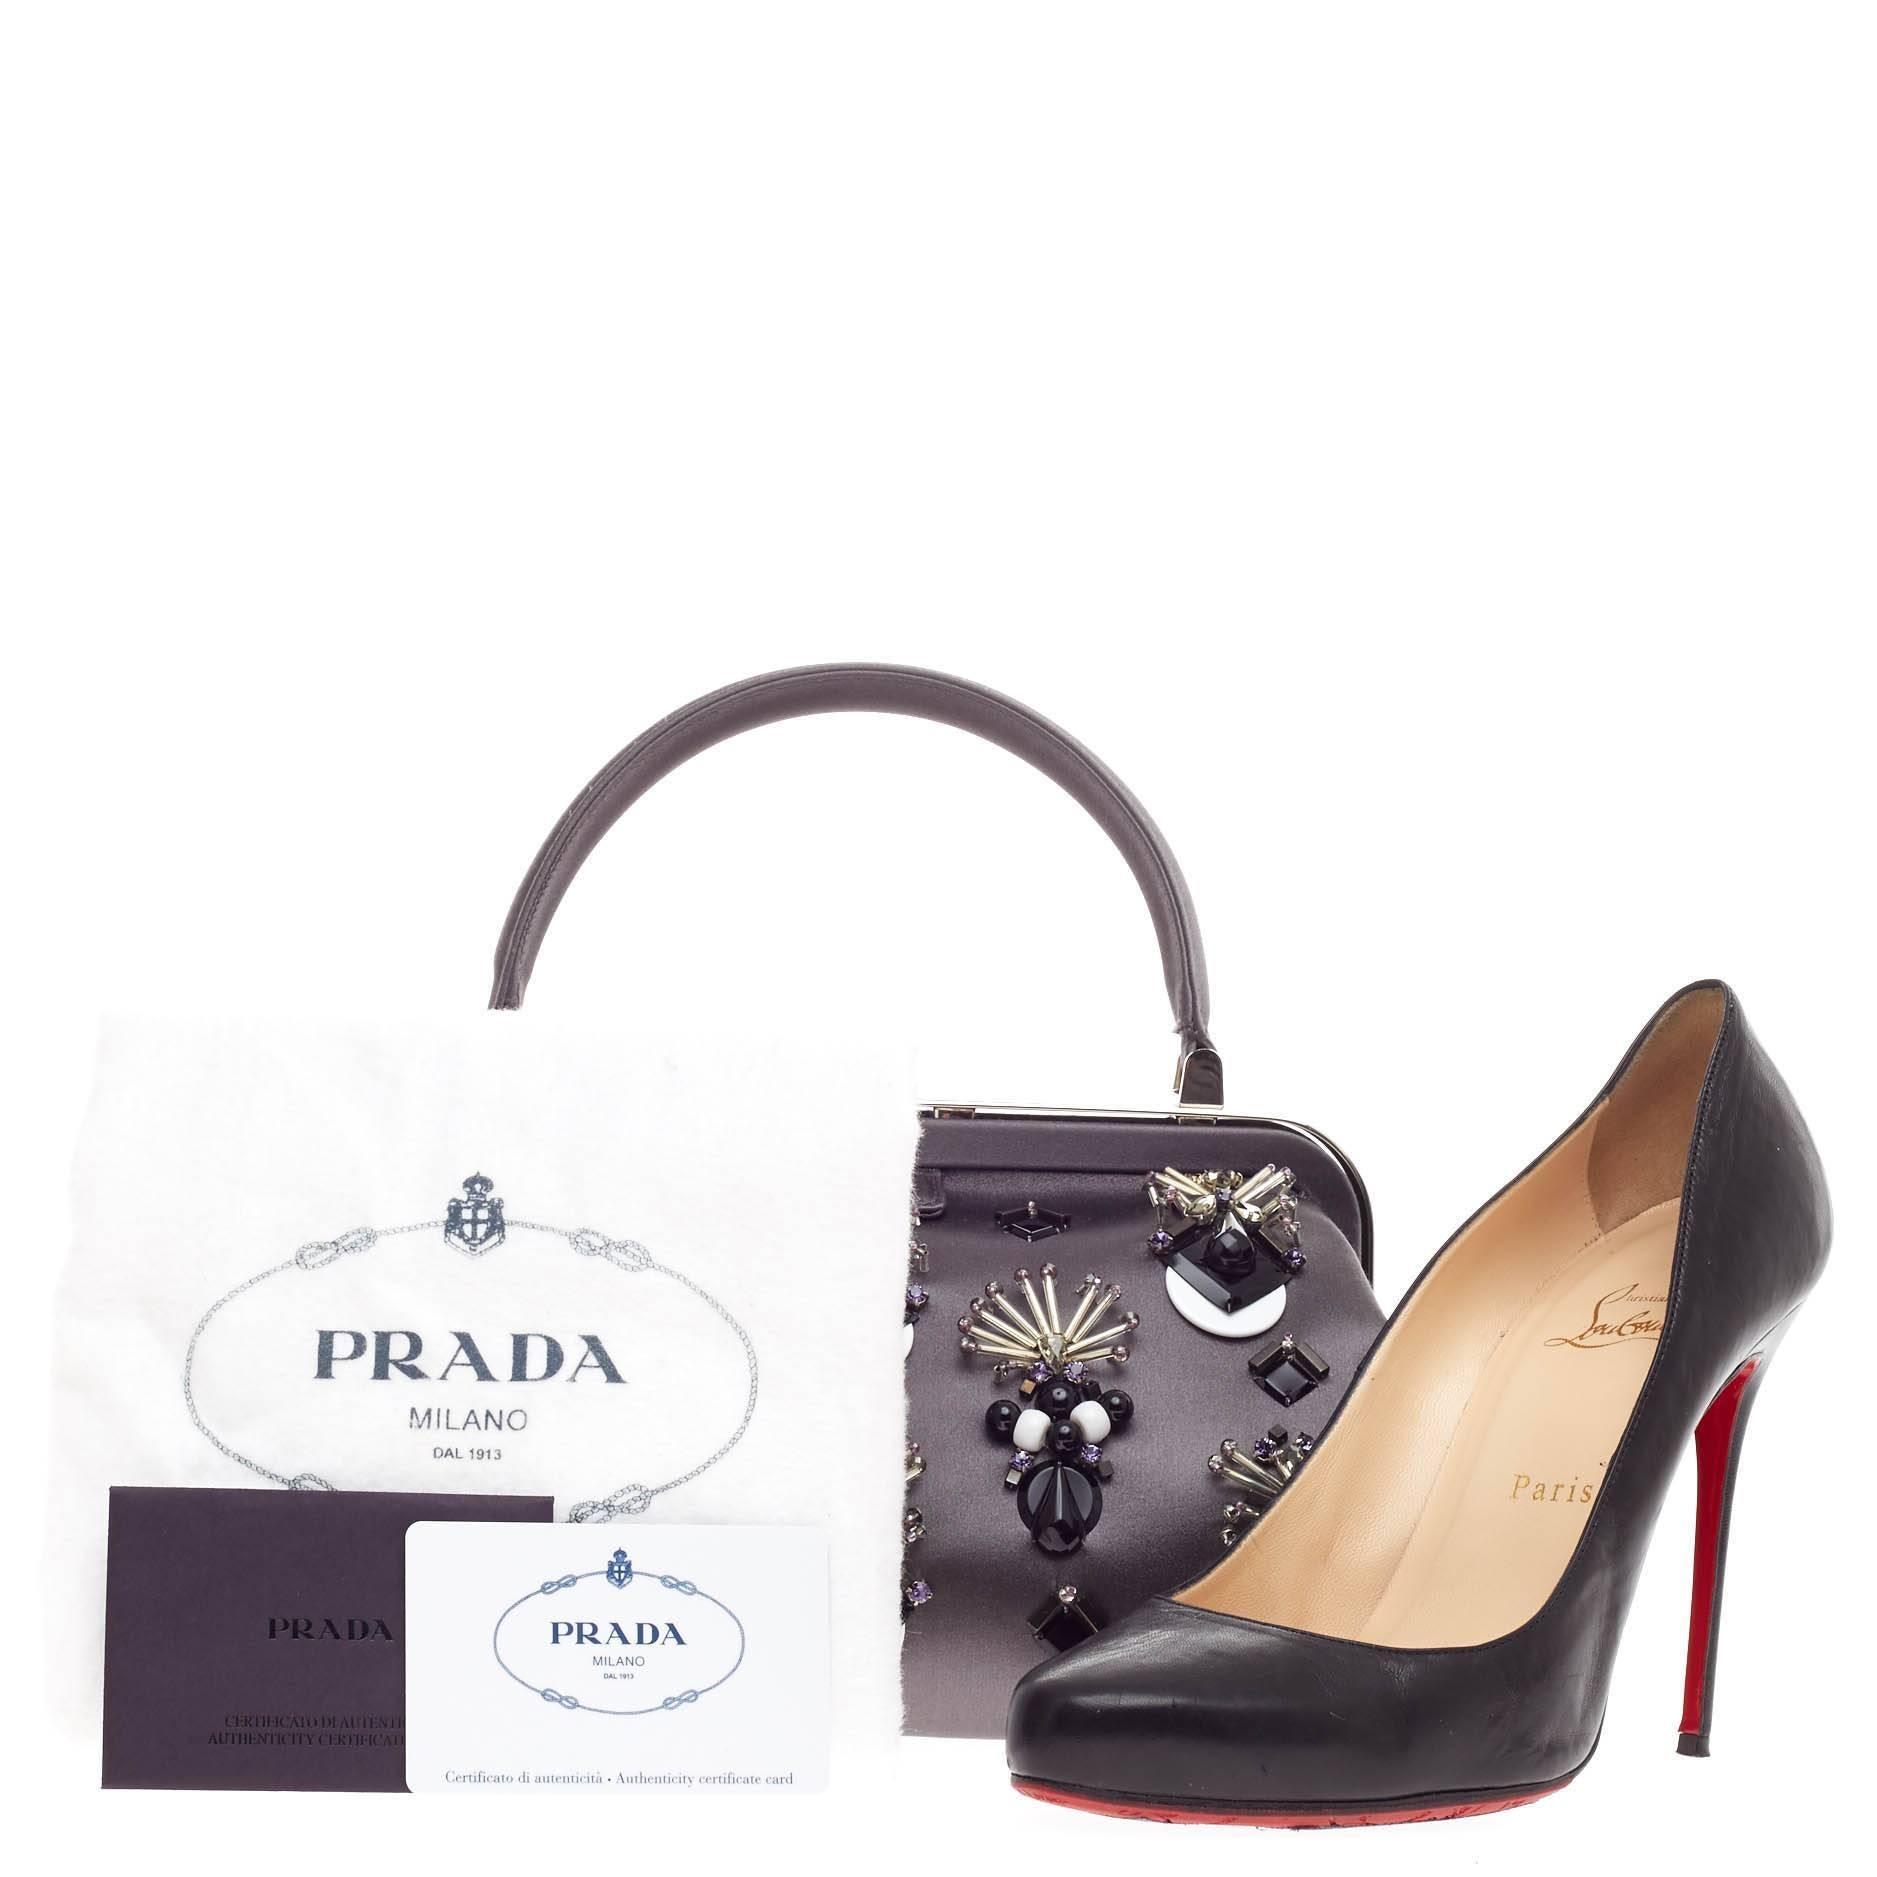 This authentic Prada Raso Ricamo Framed Doctor's Bag Jeweled Satin Medium presented in the brand's Fall 2012 Runway Collection is an elegant, formal piece made for the modern woman. Crafted in gray satin and embellished with decorative, intricate